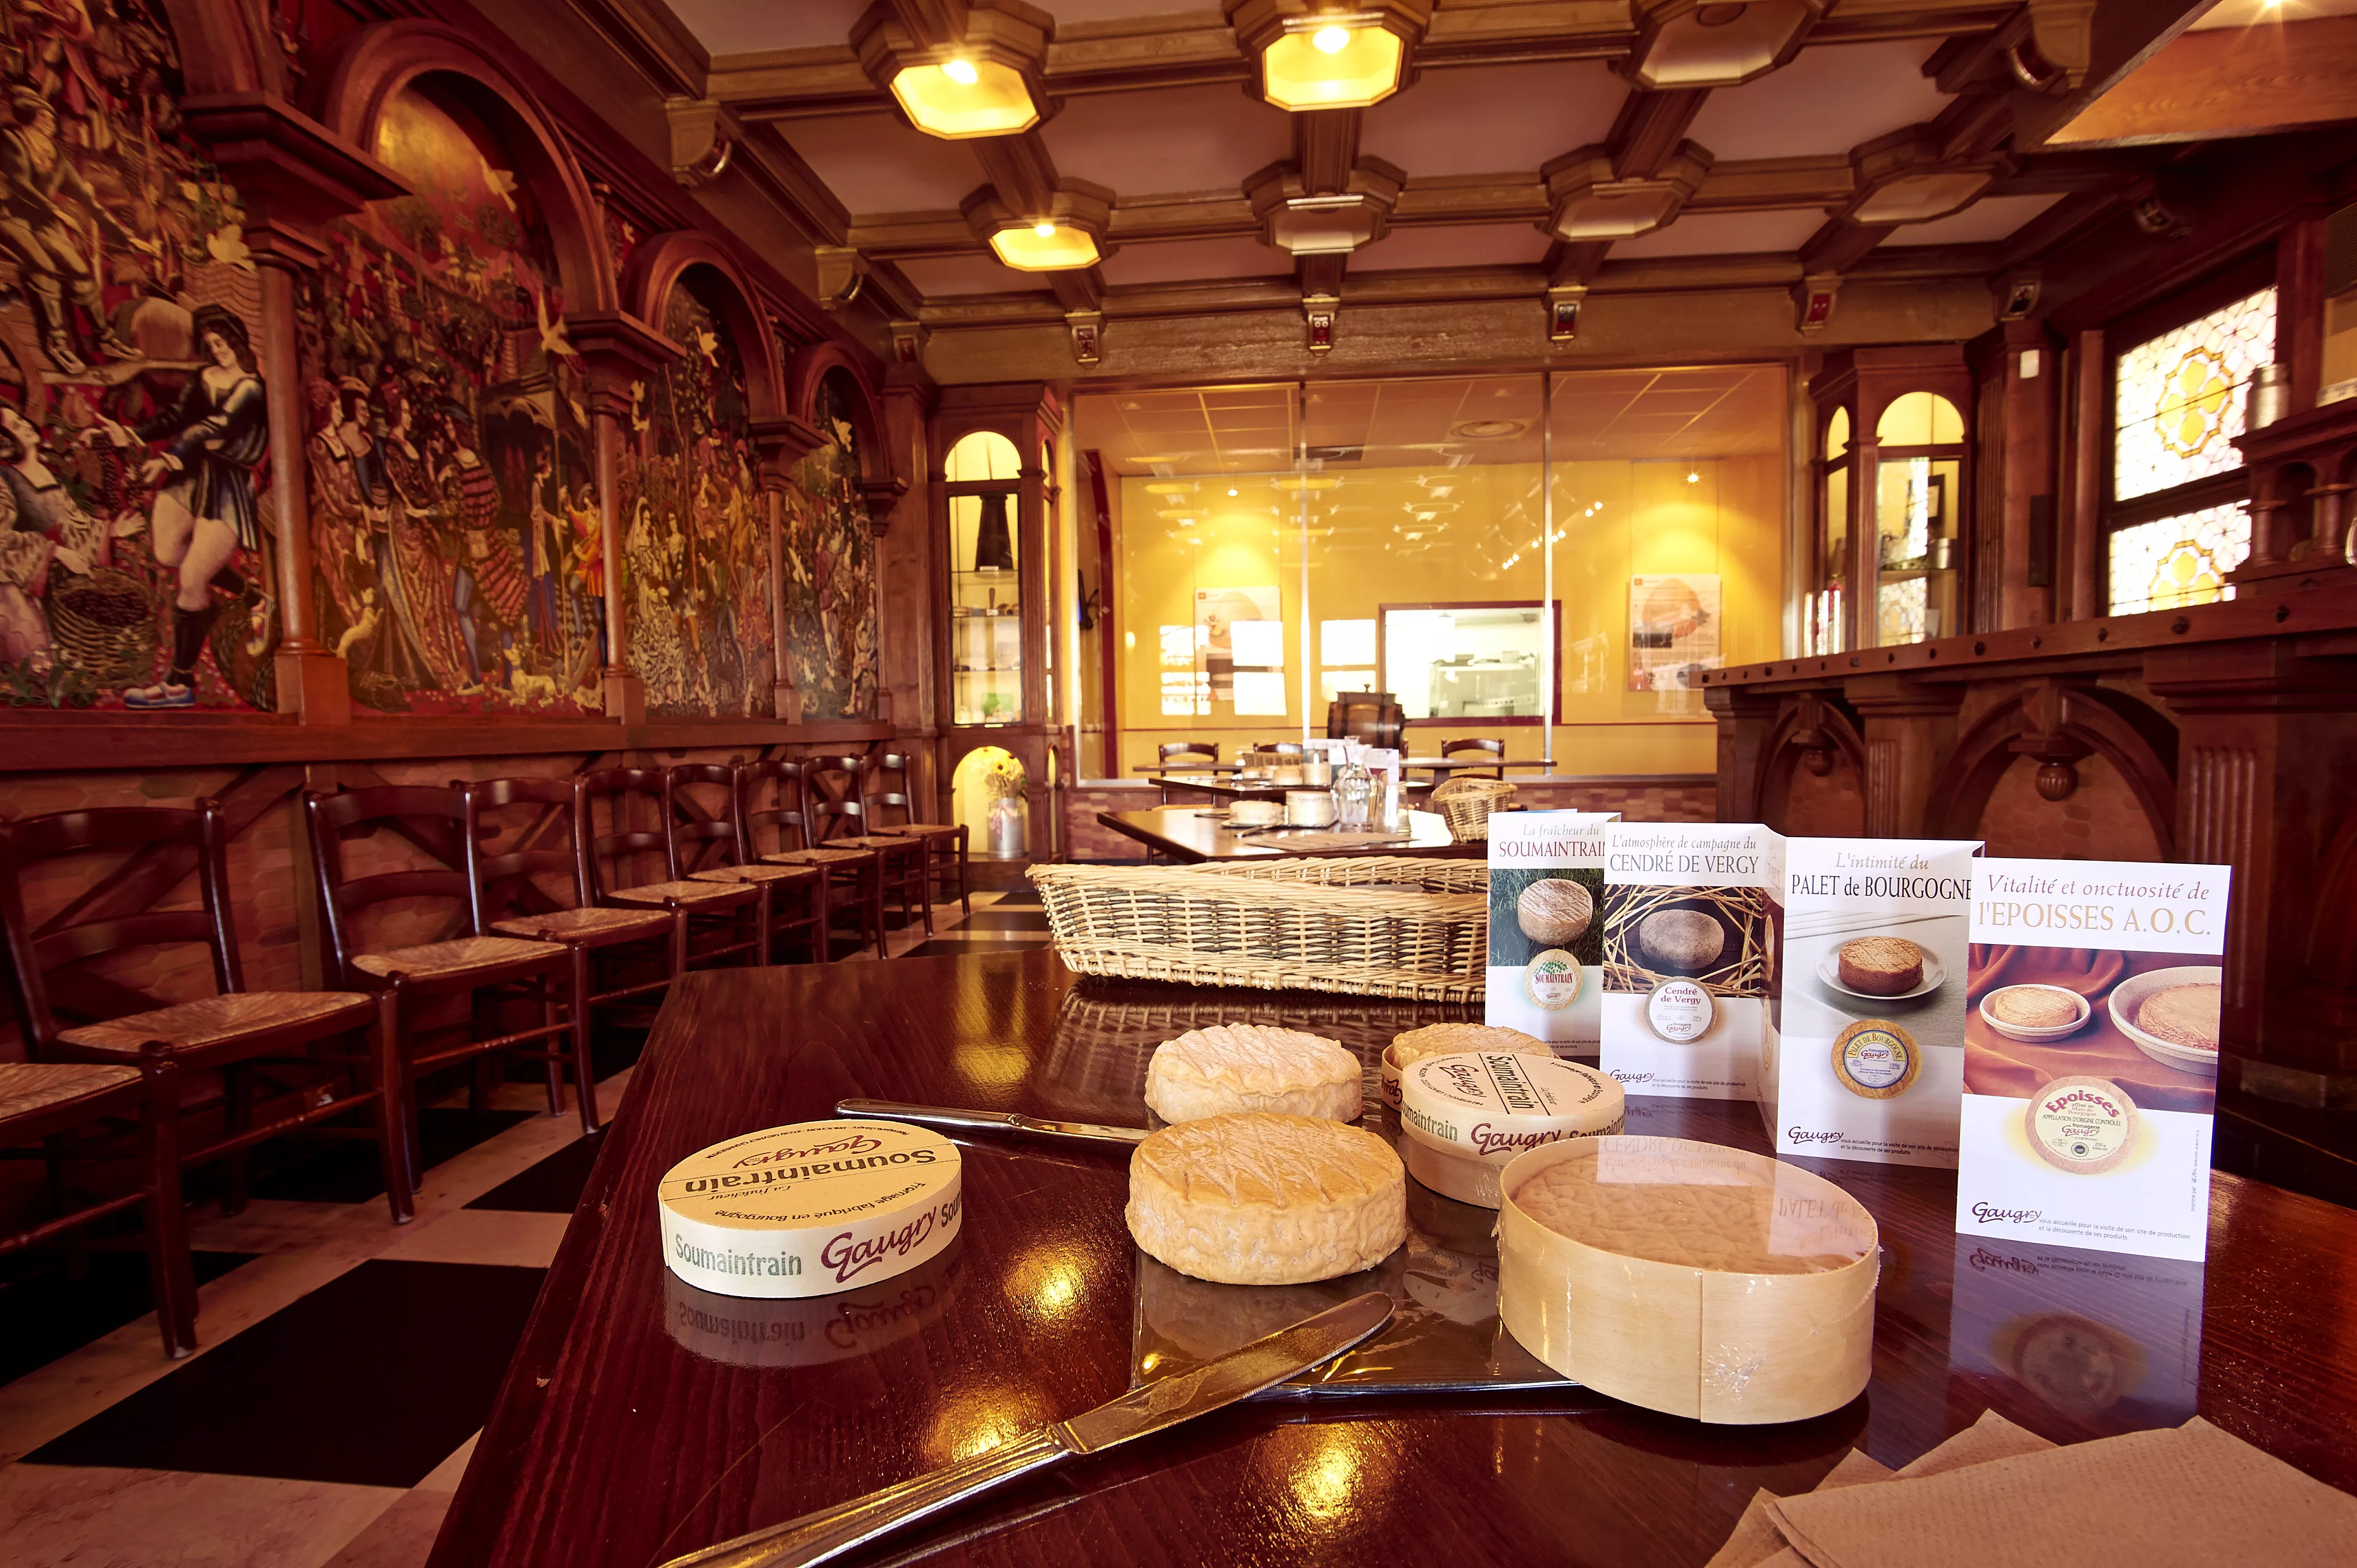 Fromagerie Gaugry in France, Europe | Cheesemakers - Rated 0.8